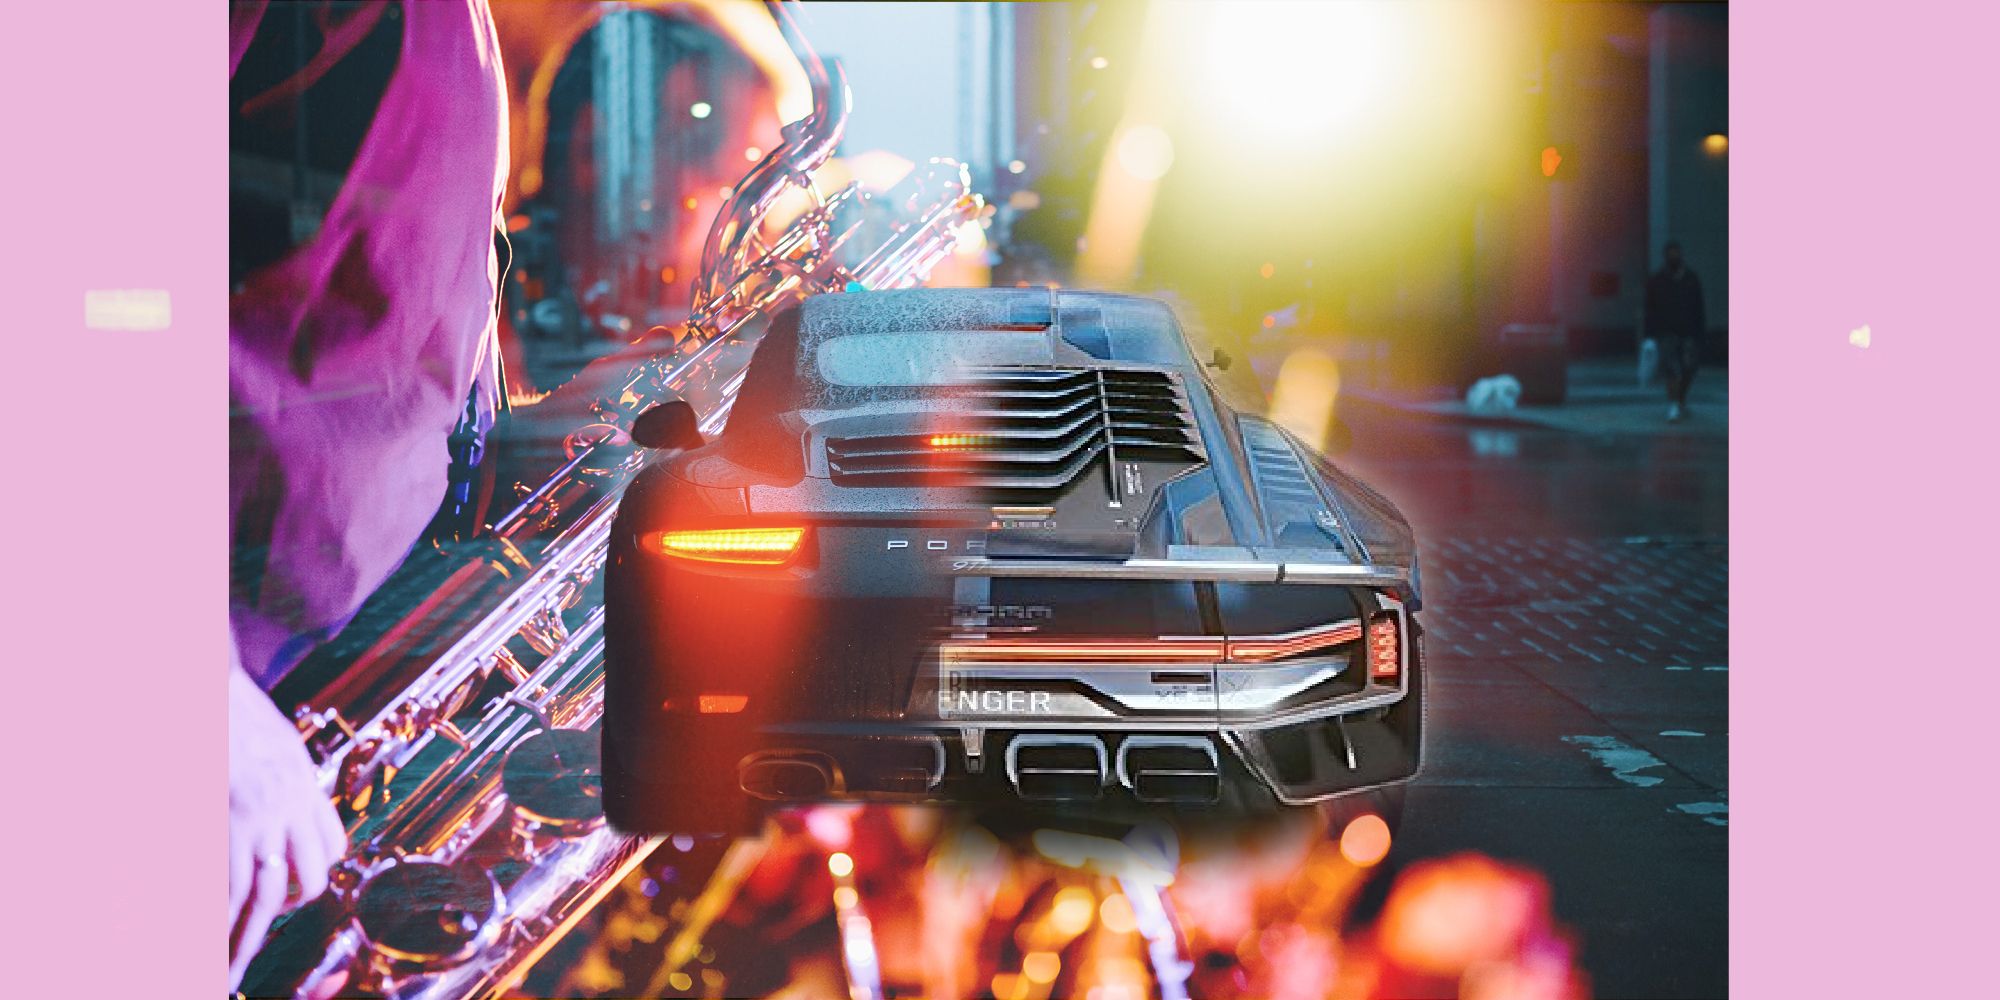 A car in Cyberpunk 2077 with pink borders around the image.